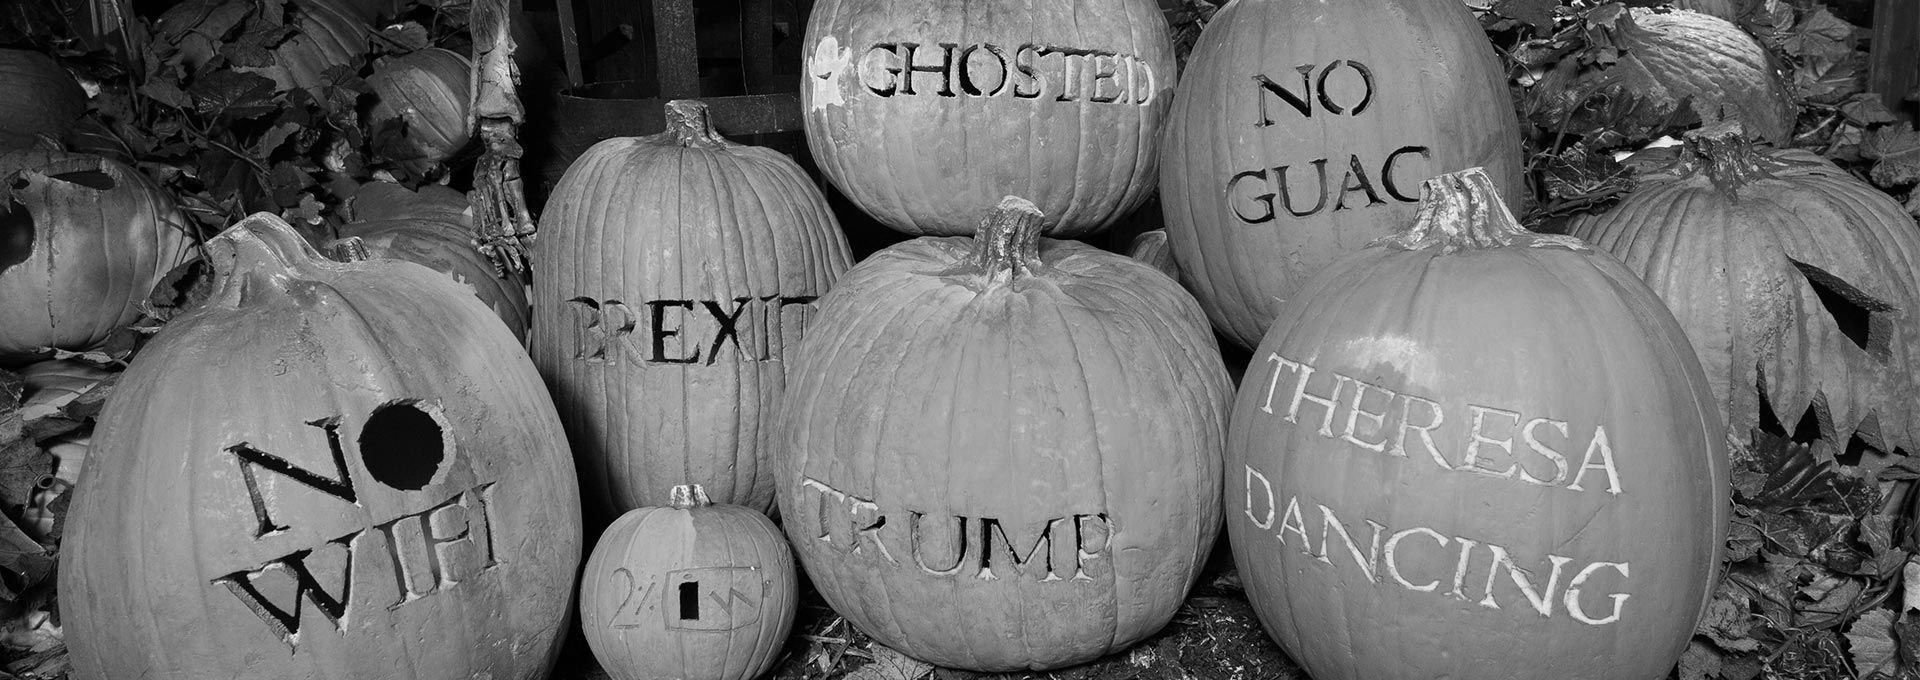 Carved pumpkins with phrases